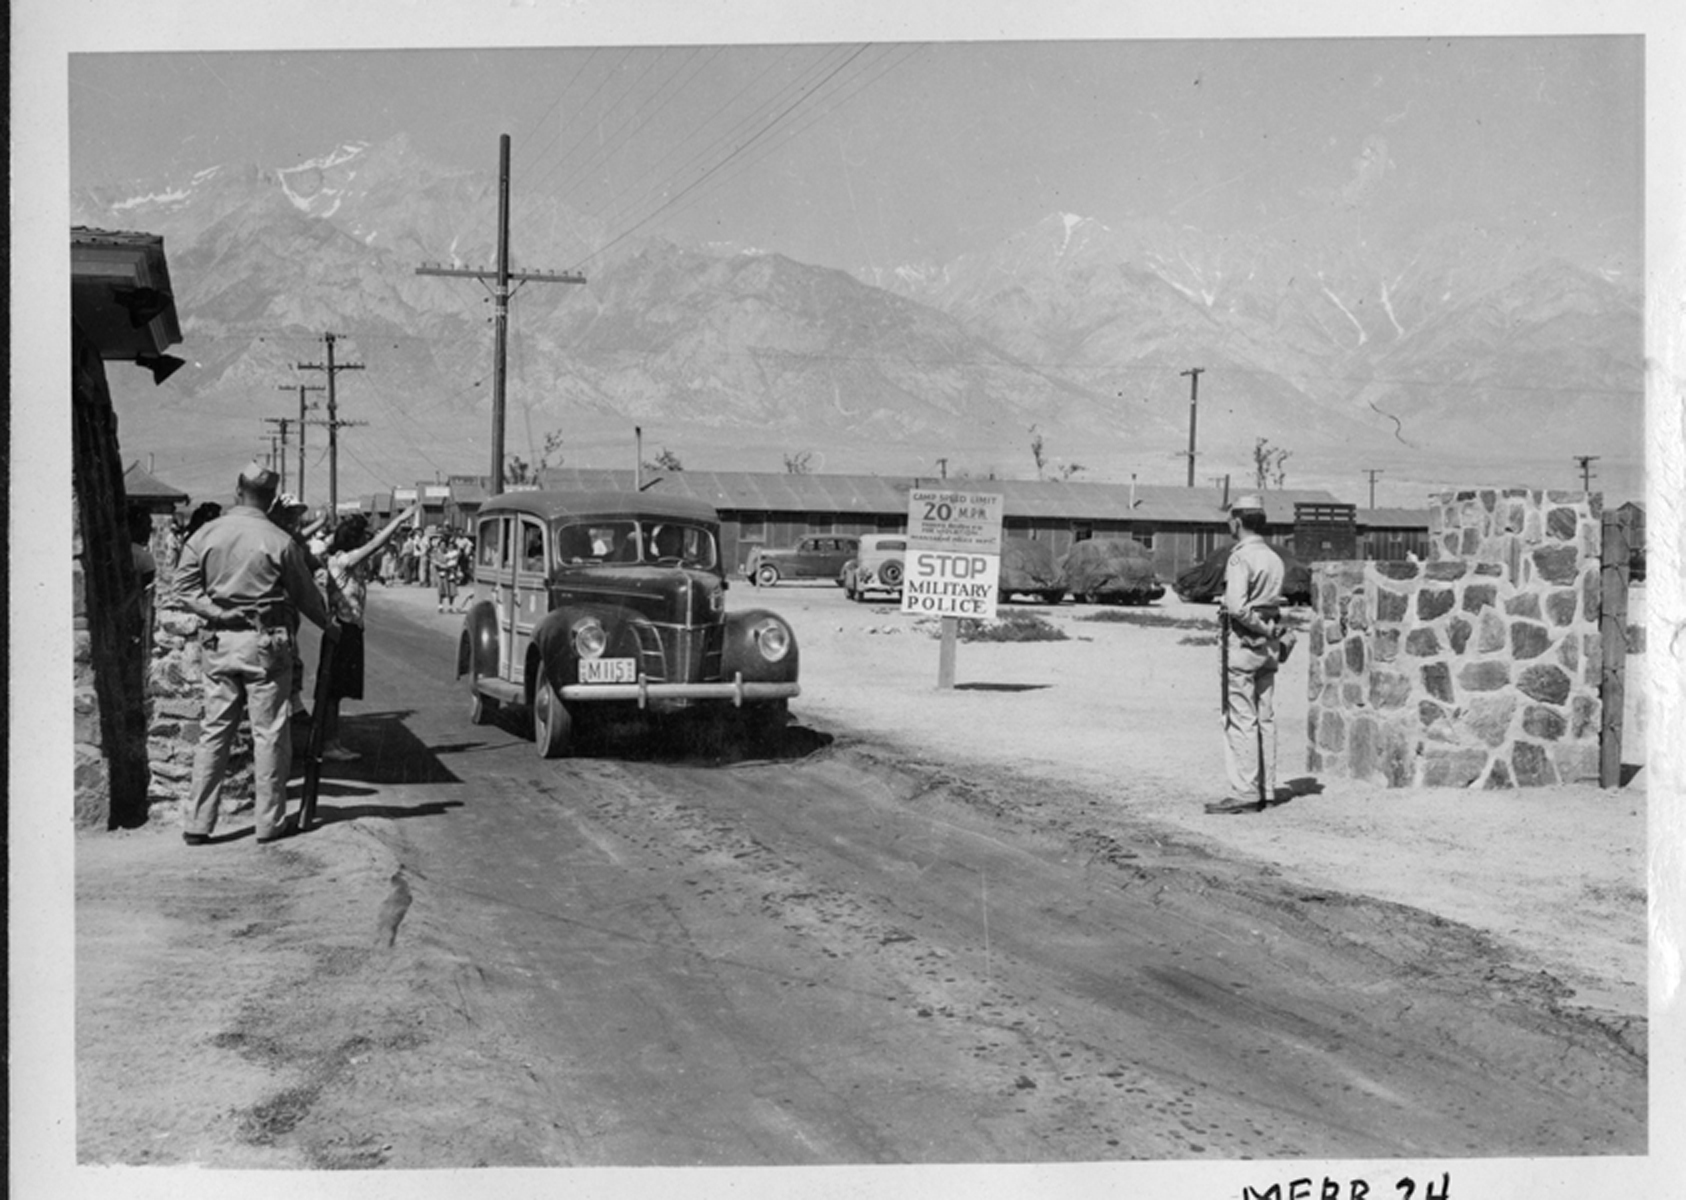 Armed guards at the main gate to the Manzanar War Relocation Center.